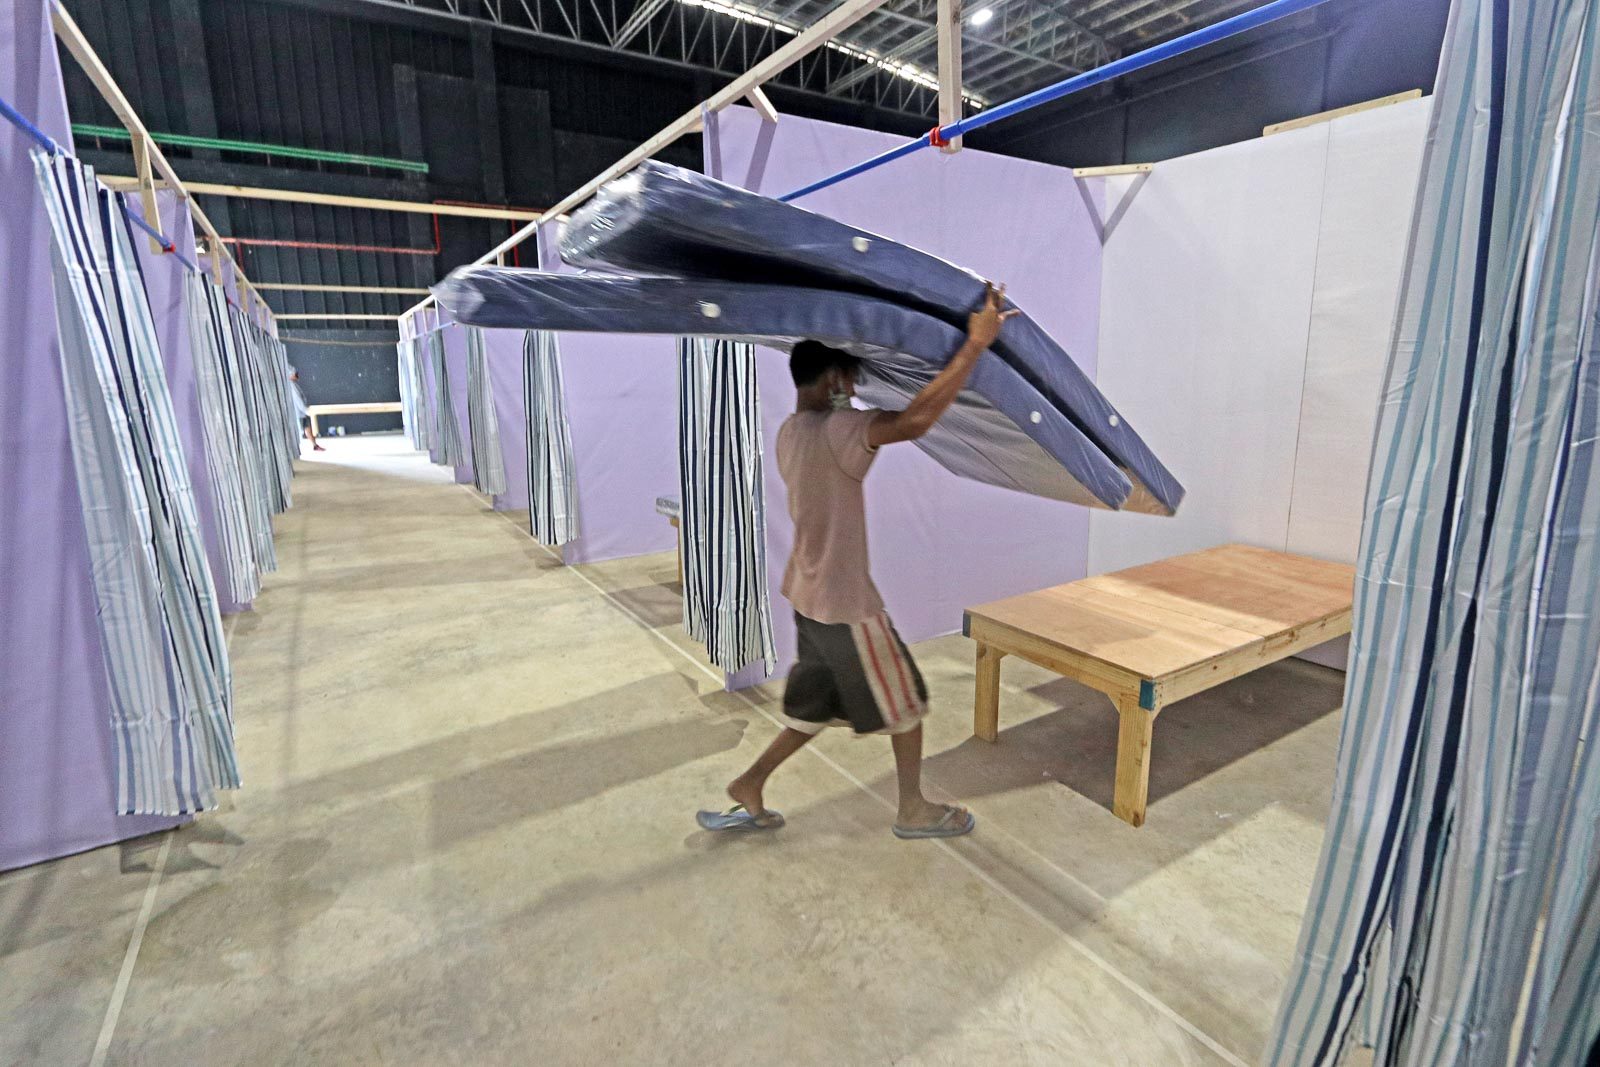 CONSTRUCTION IN A PANDEMIC. A worker carries mattresses during the construction of the back-up Barangay Isolation Center for coronavirus patients in Cebu City on May 27, 2020. Photo by Gelo Litonjua/Rappler 